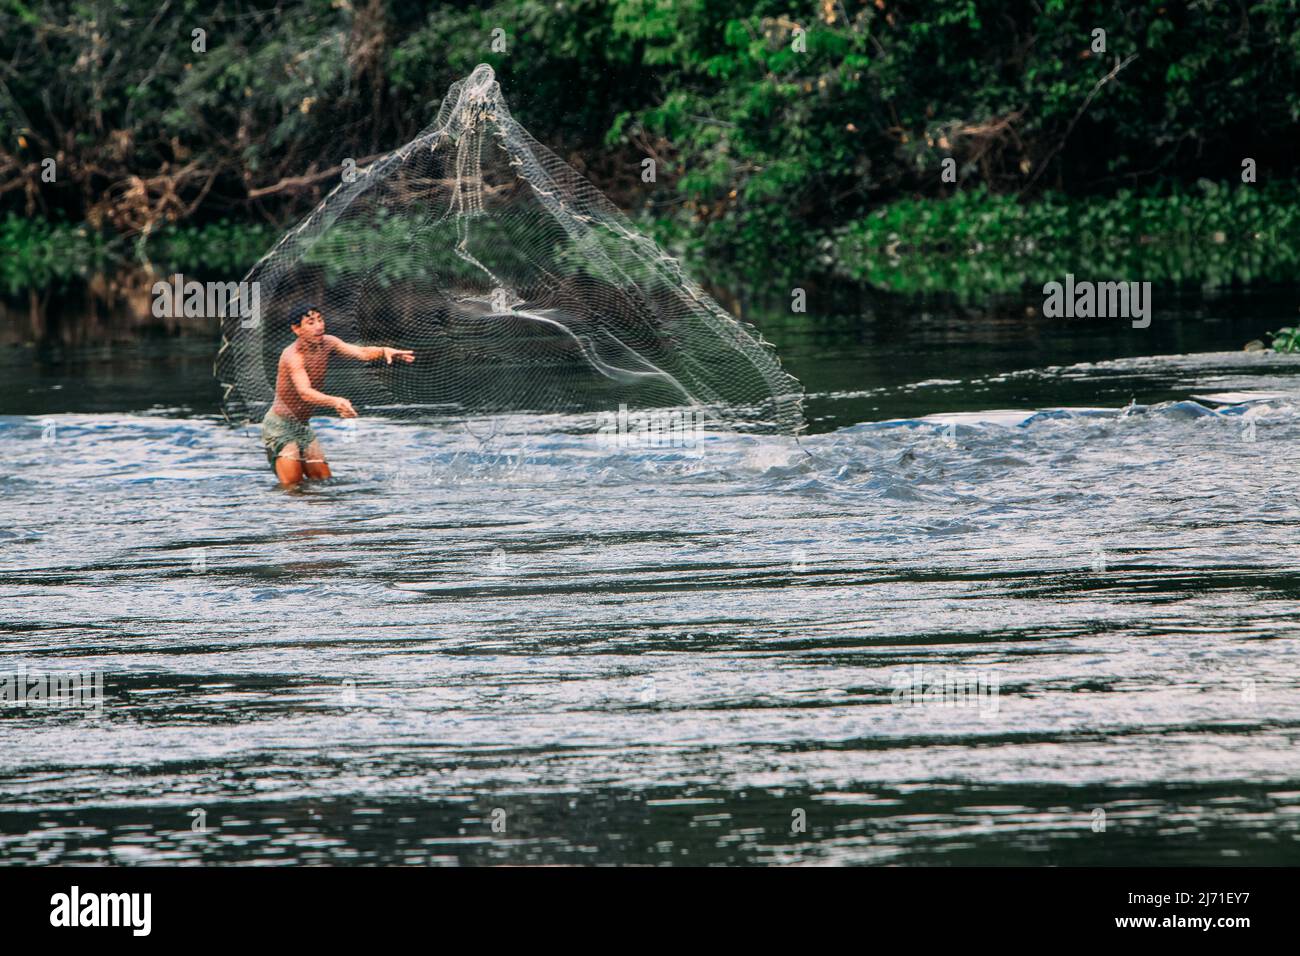 Indian man casting out his fishing net at in the Amazon River in Brazil. 2010. Stock Photo